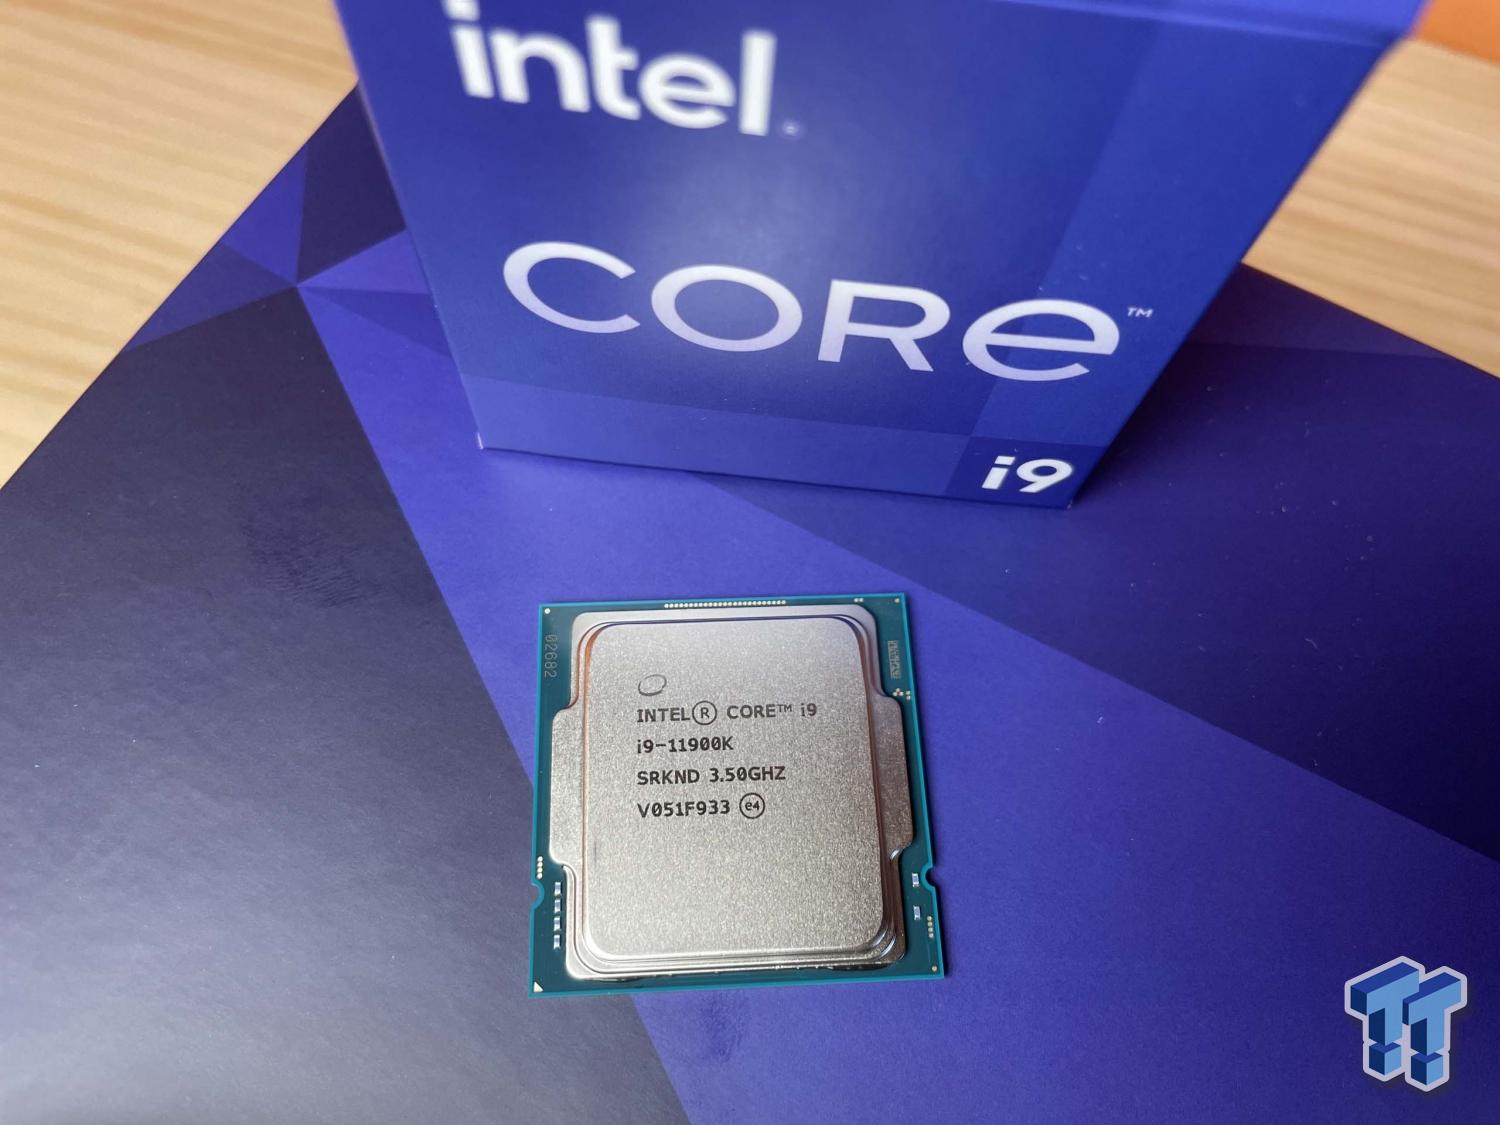 Intel Core i9-11900K Review - World's Fastest Gaming Processor?